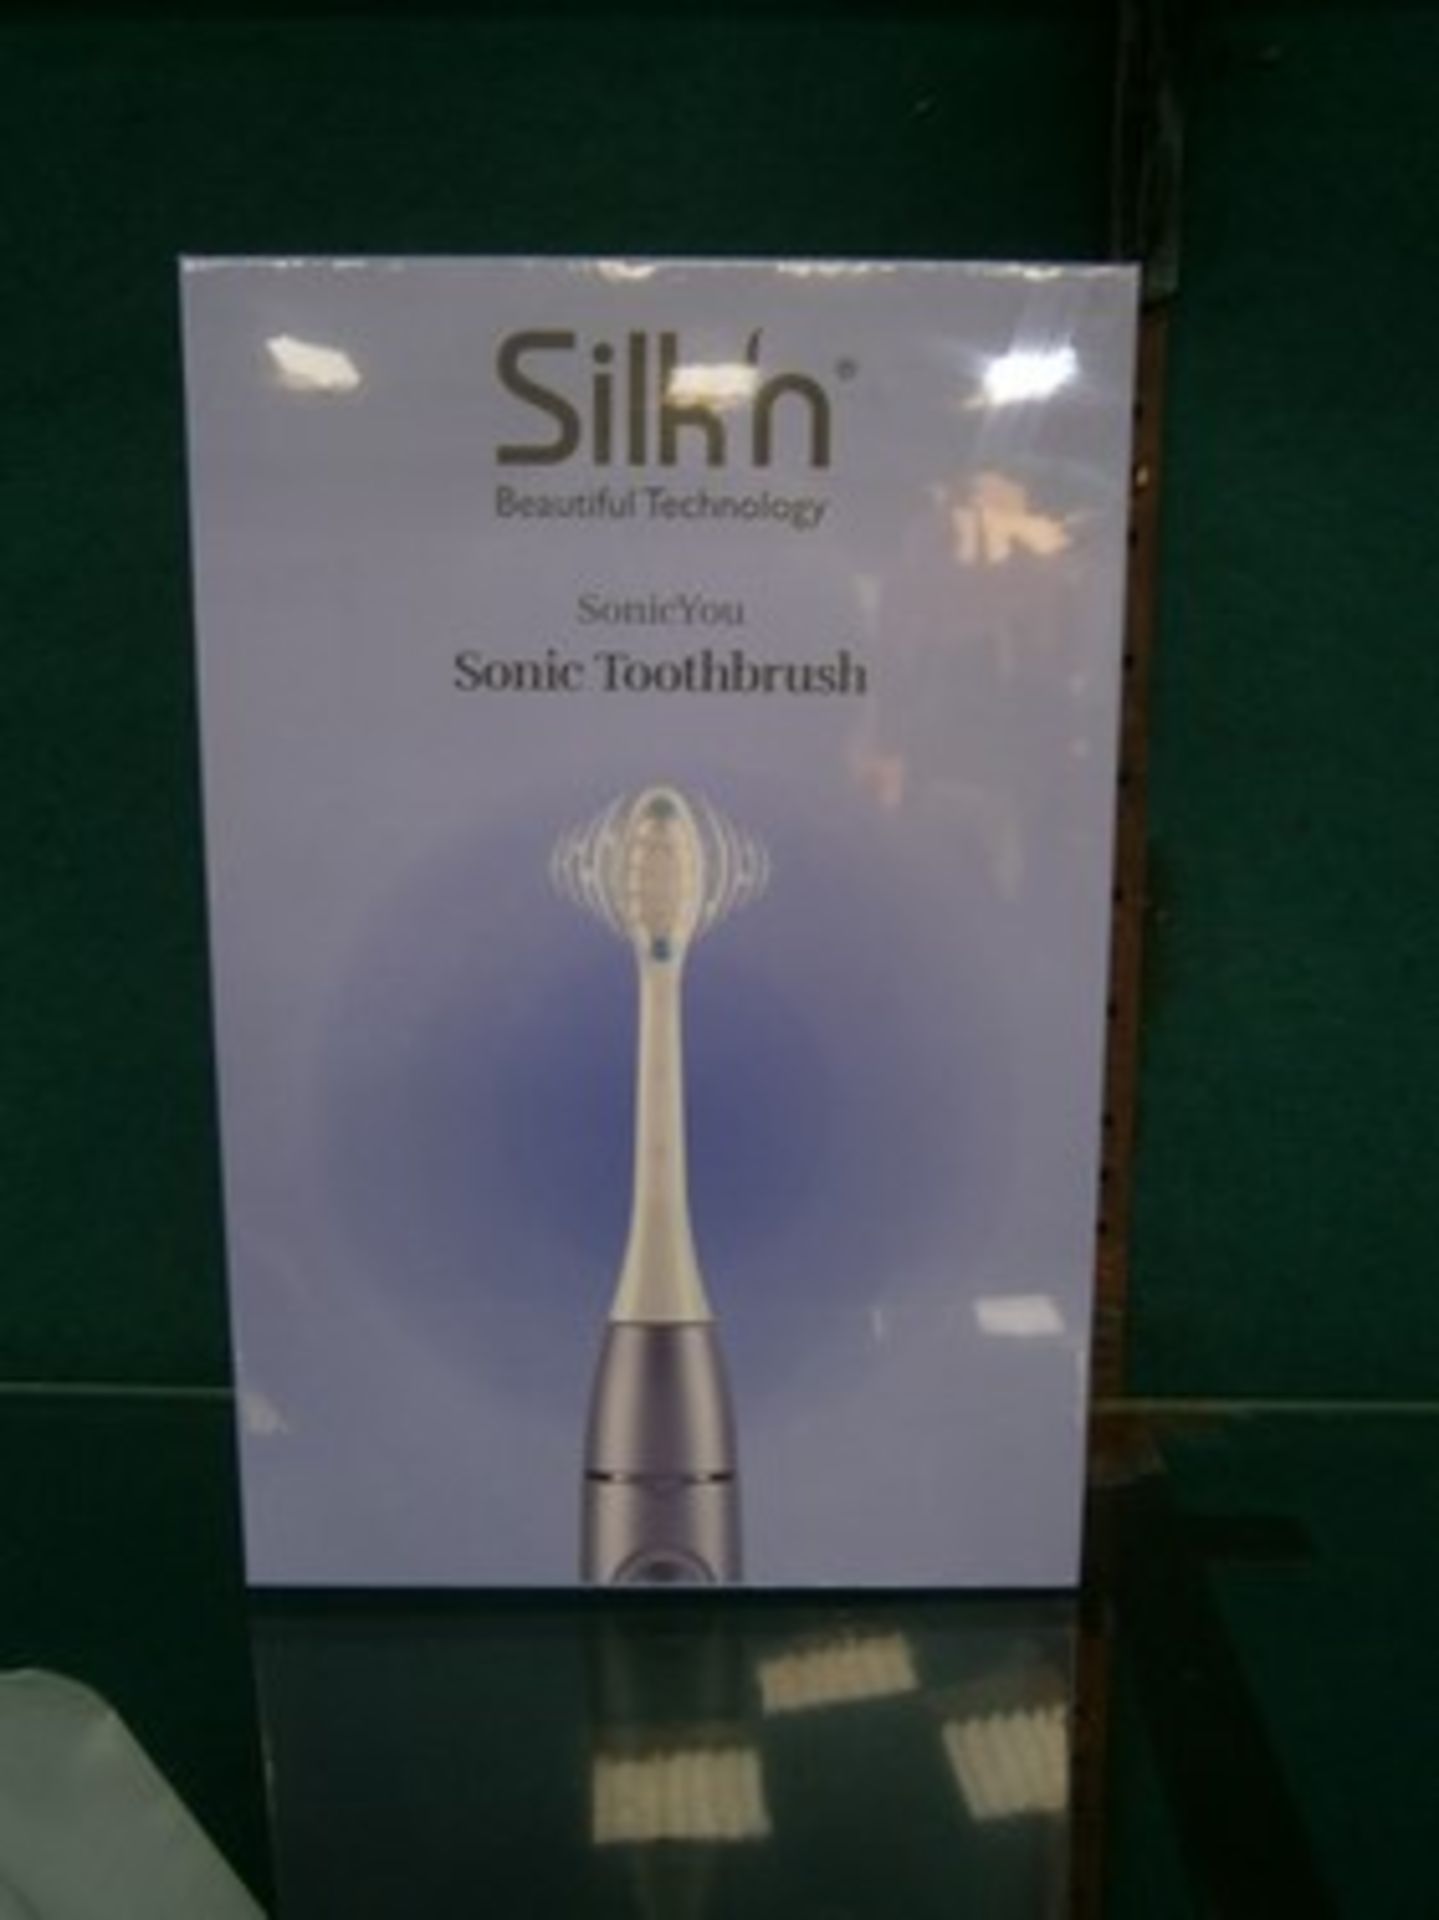 1 x Silk'N Sonic toothbrush, type Sonic You - Sealed new in box (C14A)